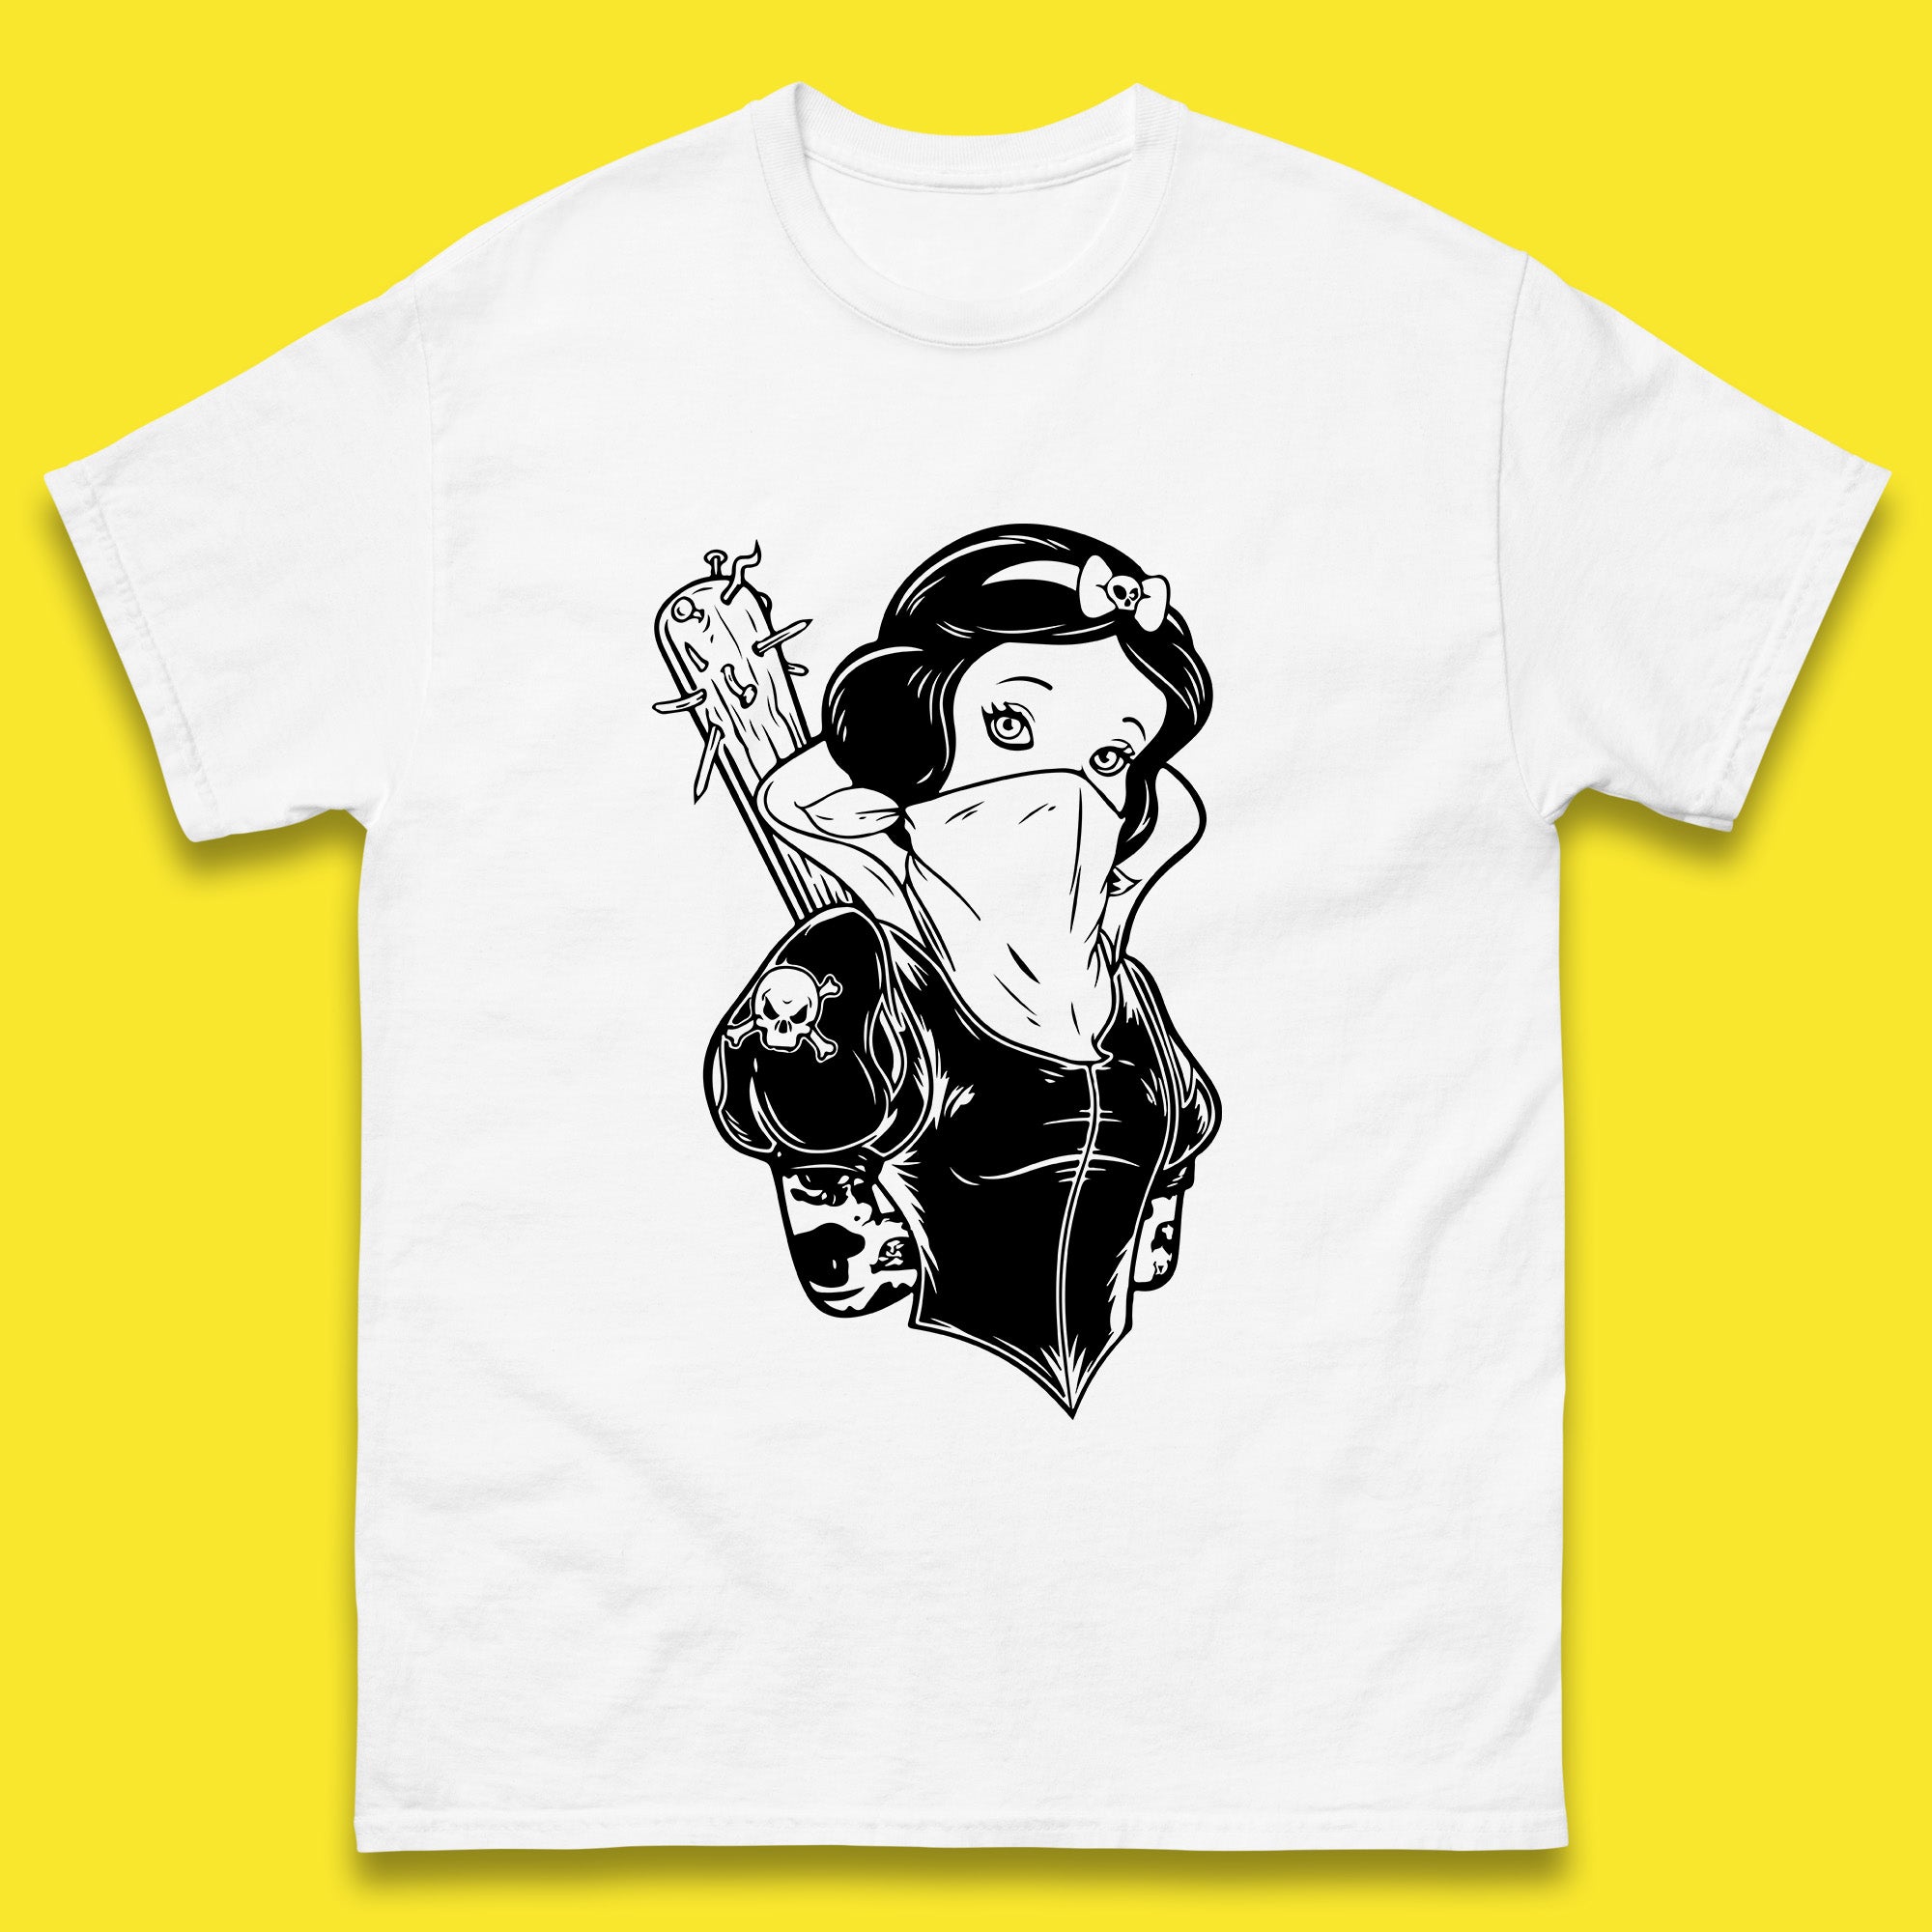 Not So Snow White Twisted Rock Parody Disney Princess Gangster Skull Tattoo Punk Princess Tattooed Emo Alice In A Jack Mens Tee Top